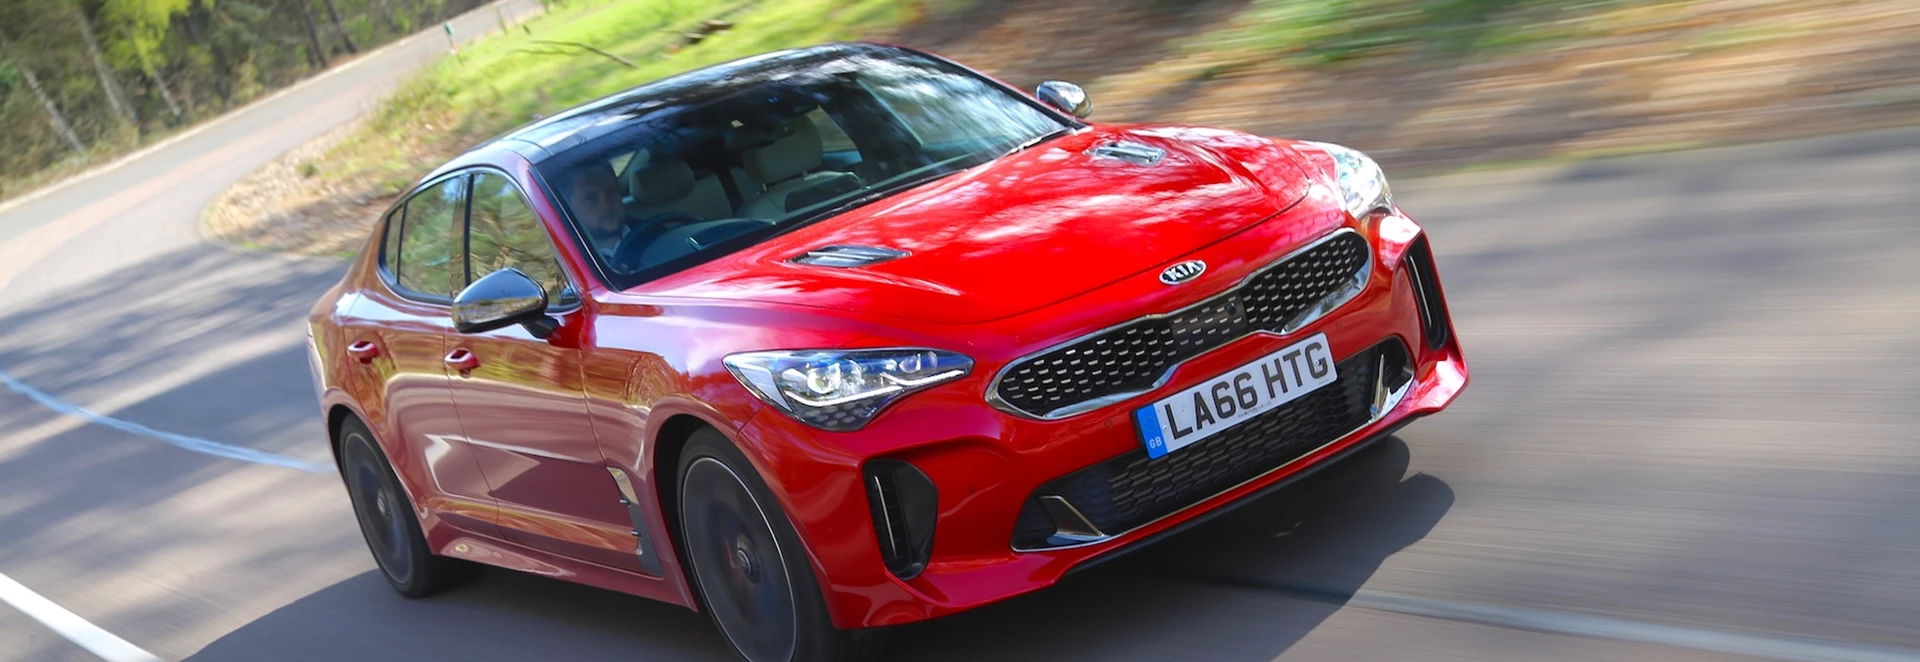 New Kia Stinger priced from £31,995 